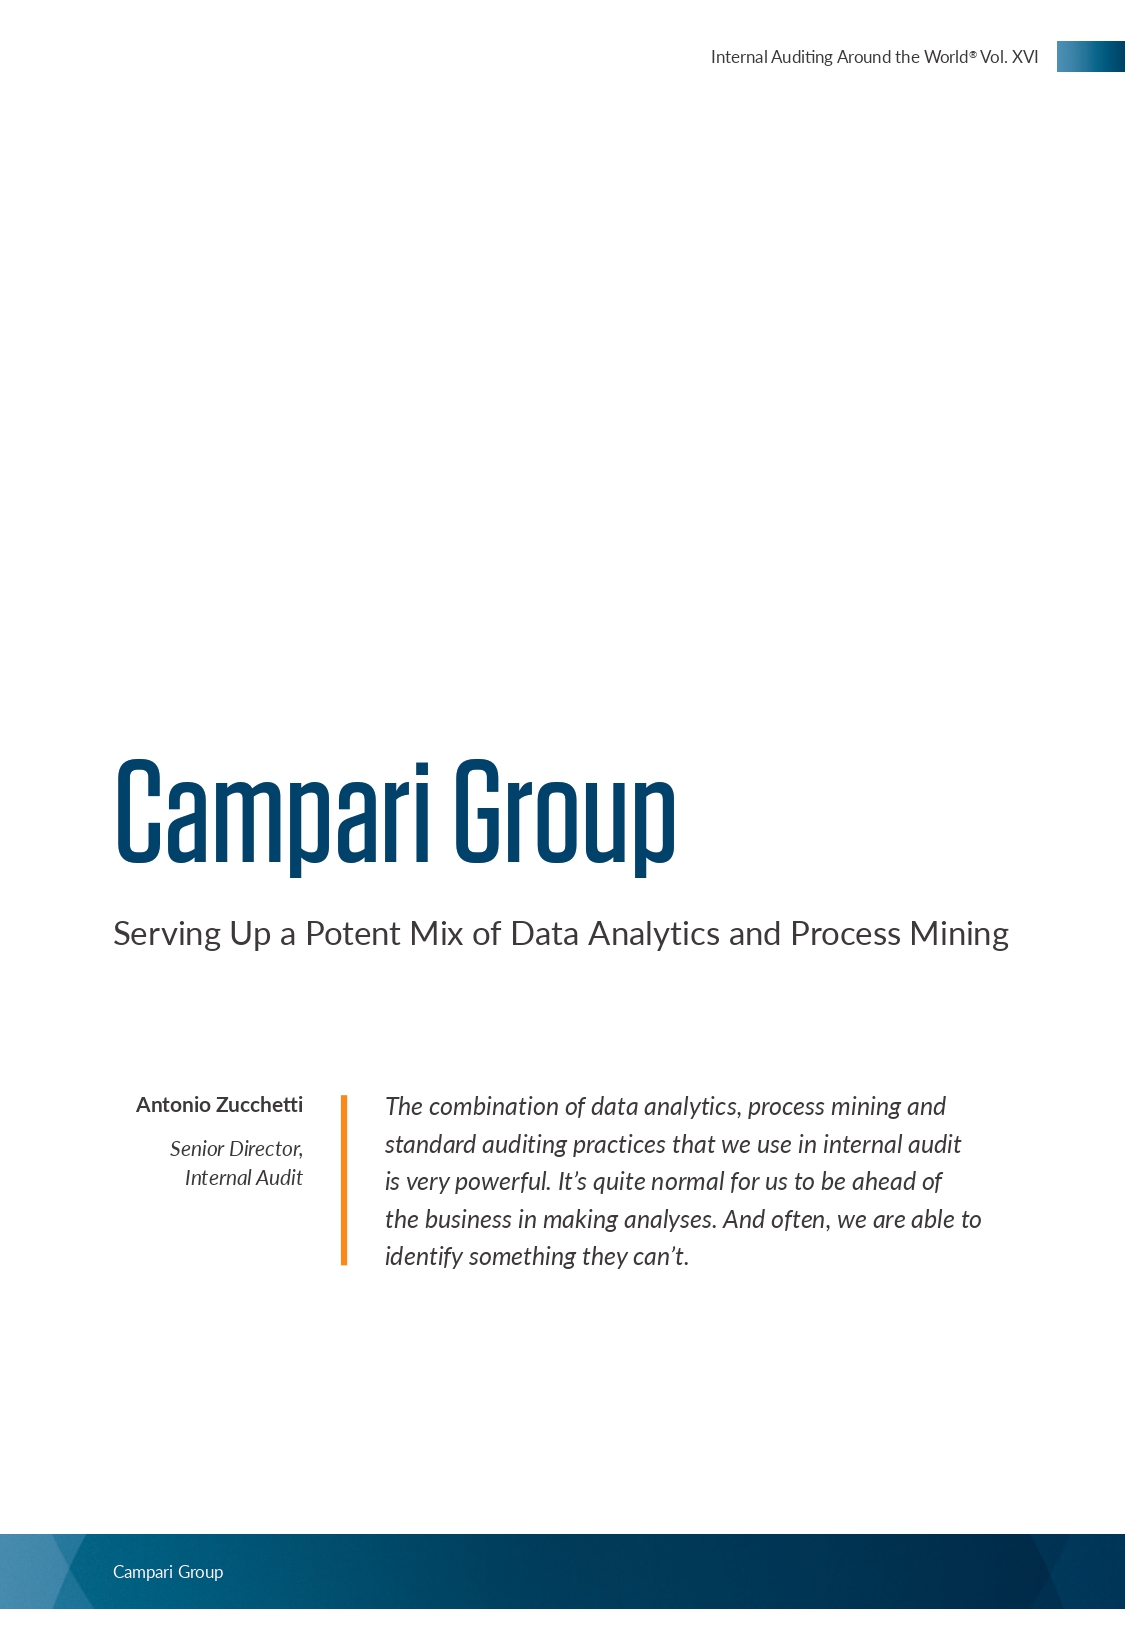 Campari Group: Serving Up a Potent Mix of Data Analytics and Process Mining